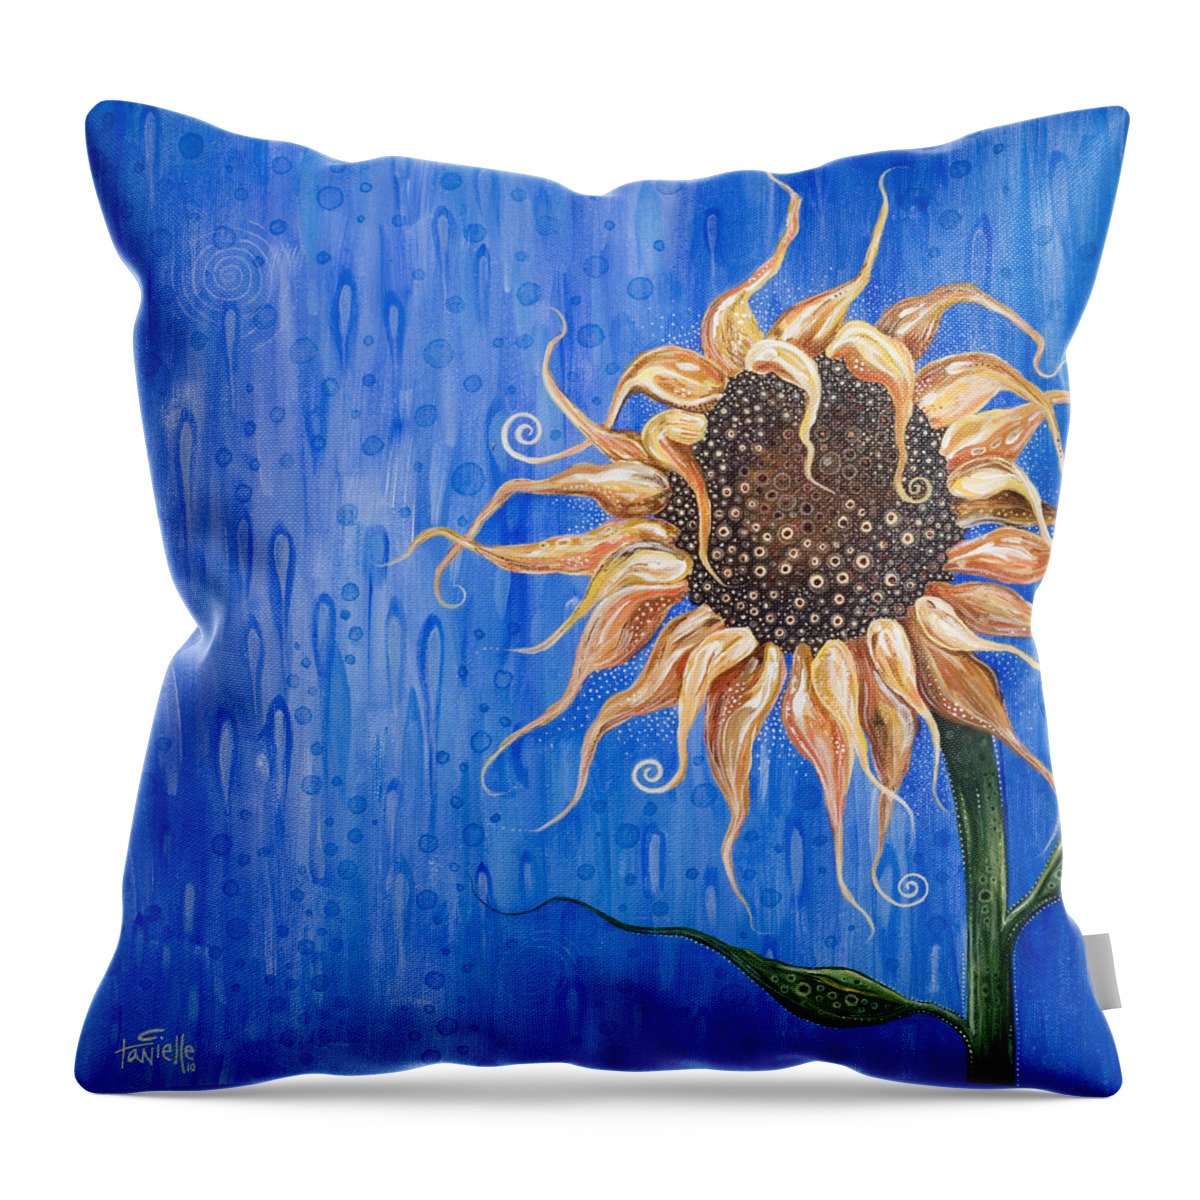 Floral Throw Pillow featuring the painting Sunshine After the Rain by Tanielle Childers